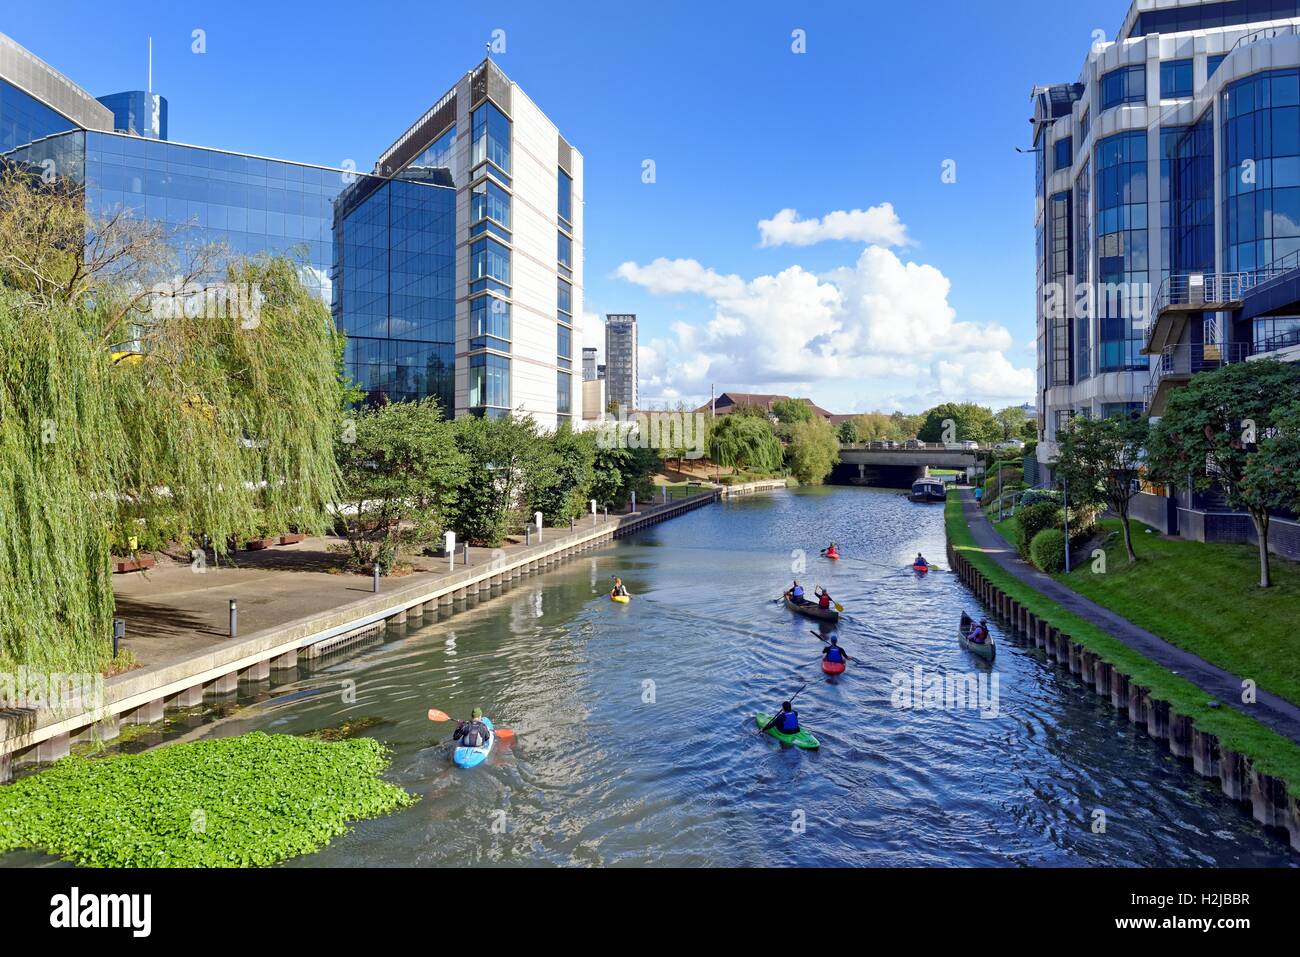 The Grand Union canal at Brentford west London UK Stock Photo